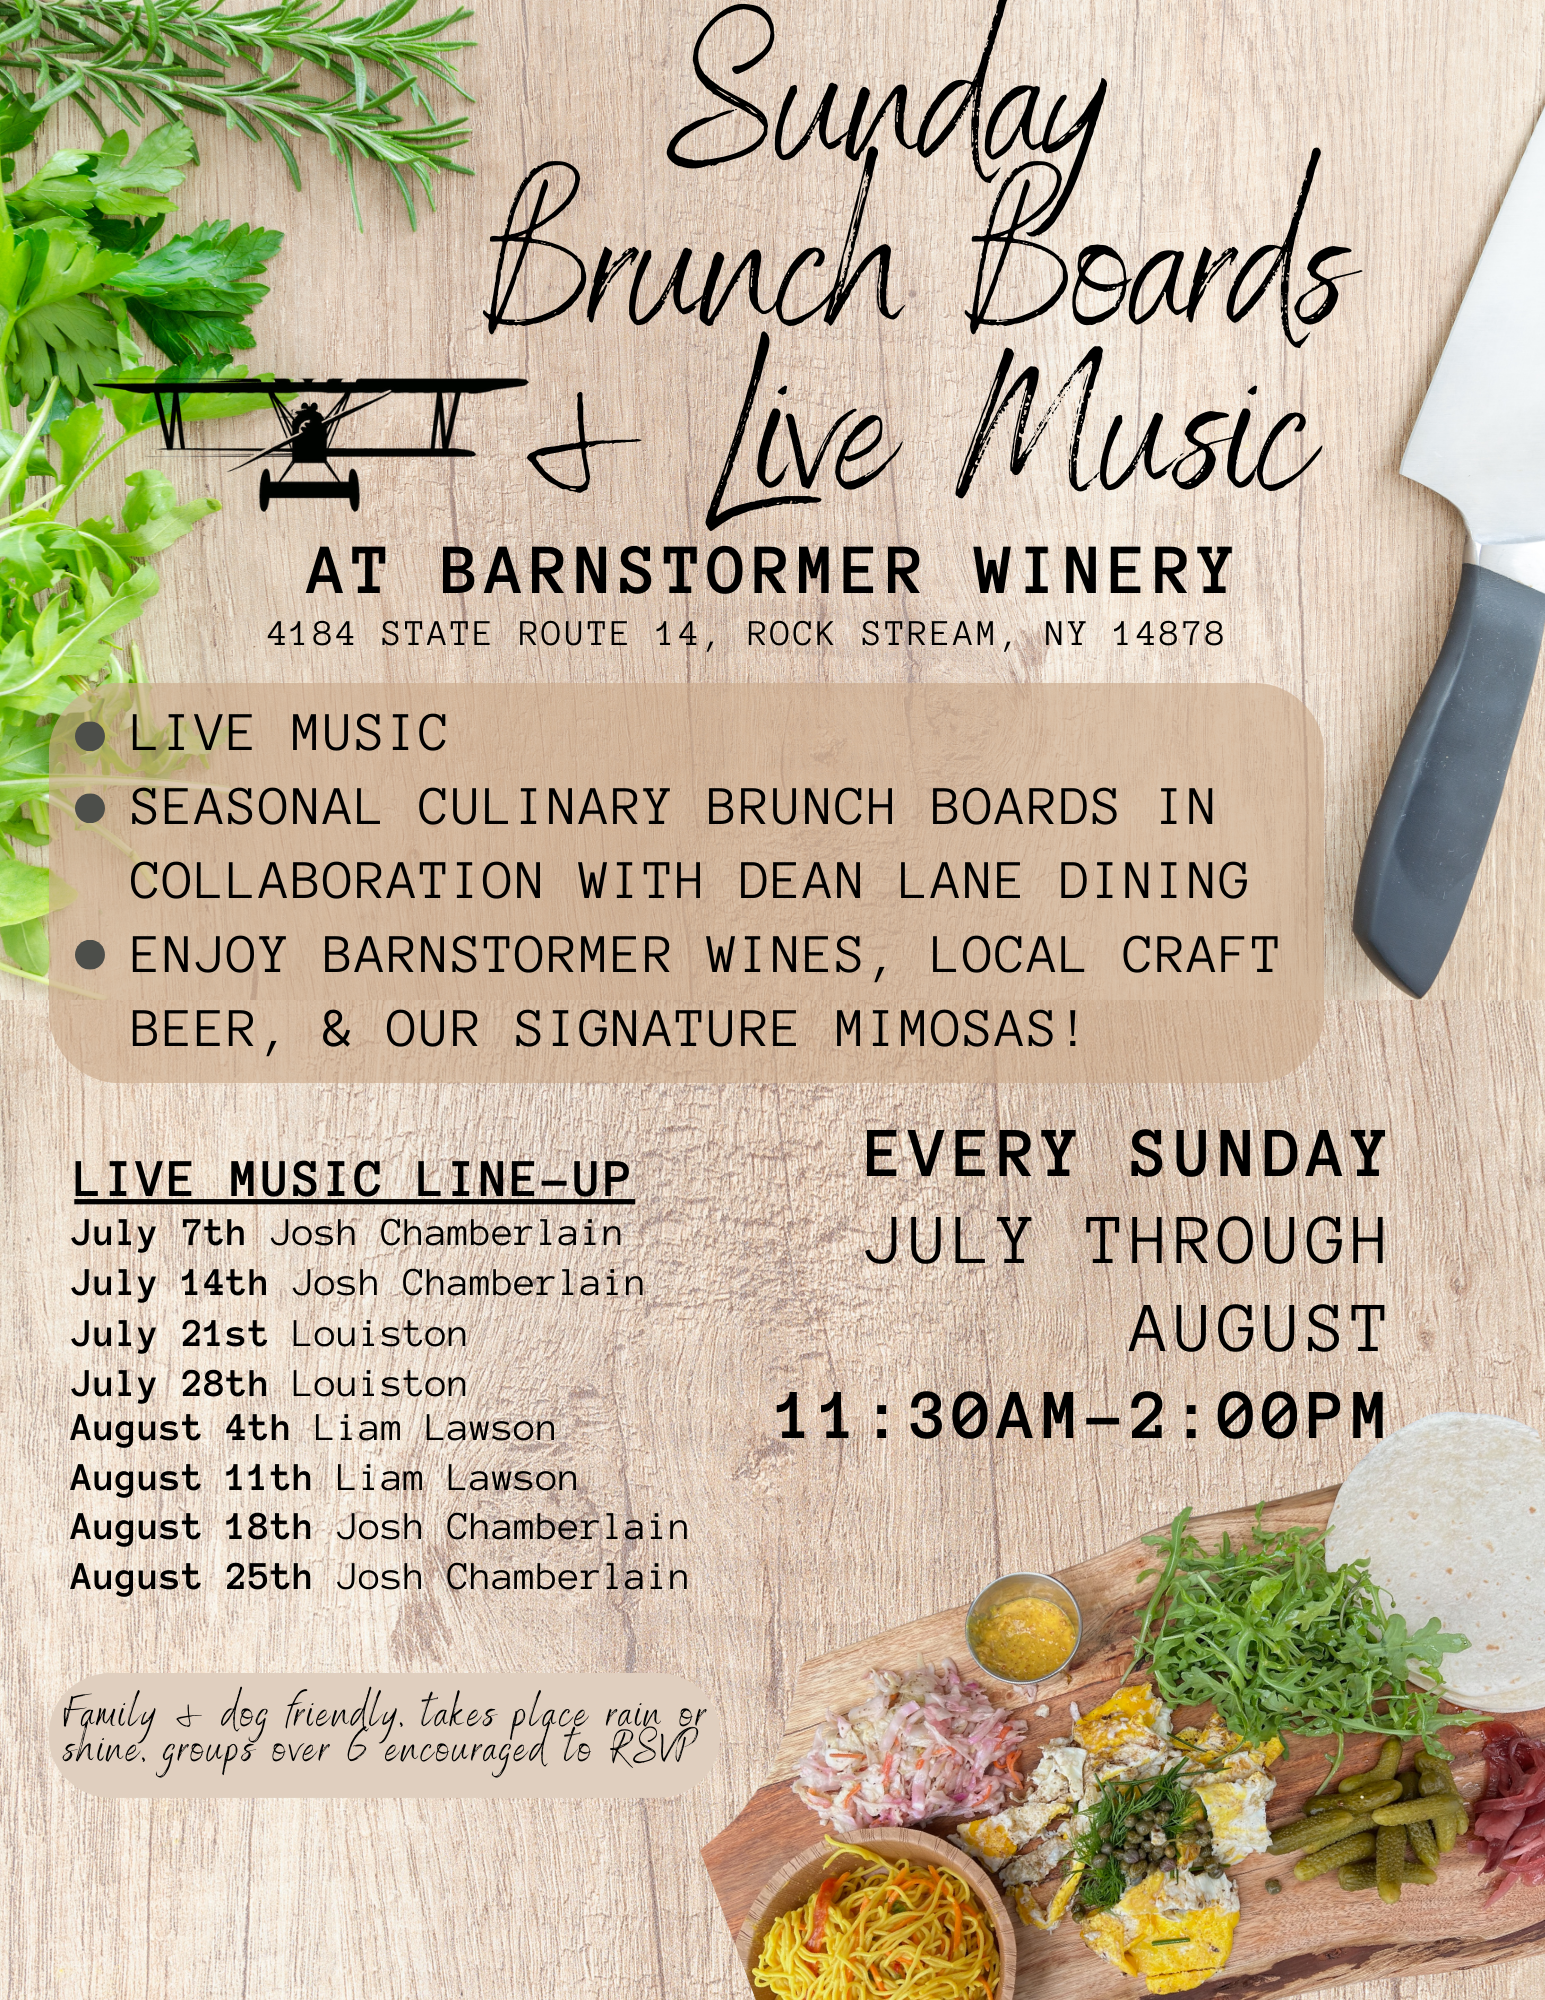 Sunday Brunch series & live music. Seasonally sourced ingredients for our brunch boards in collaboration with Dean Lane Dining, featuring live music. Every Sunday July through August 2024!